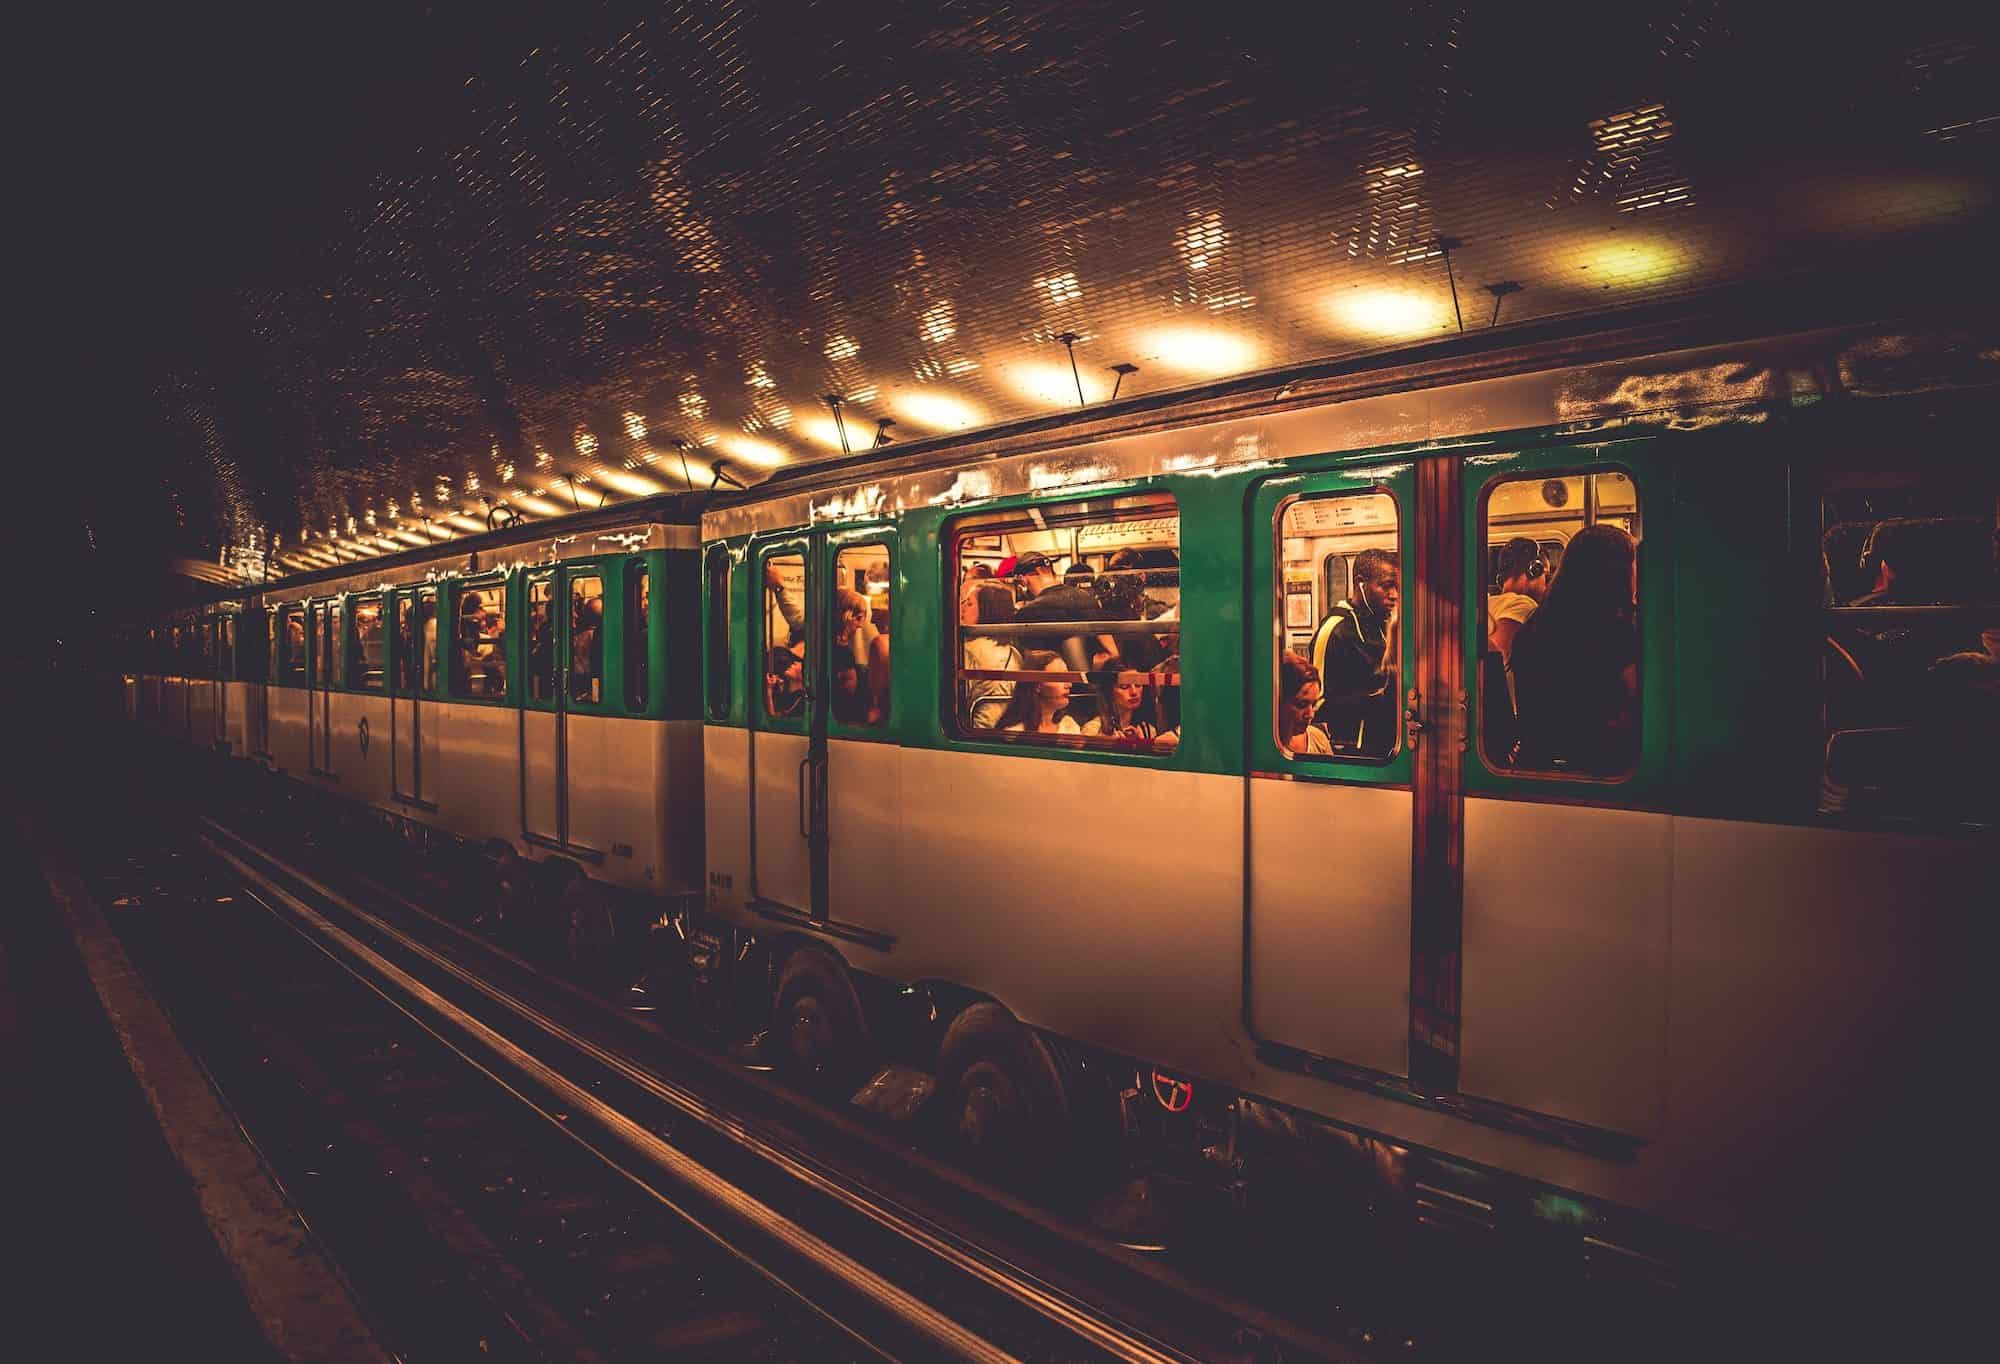 A metro pulling in at a metro station in Paris with passengers seen through the windows.